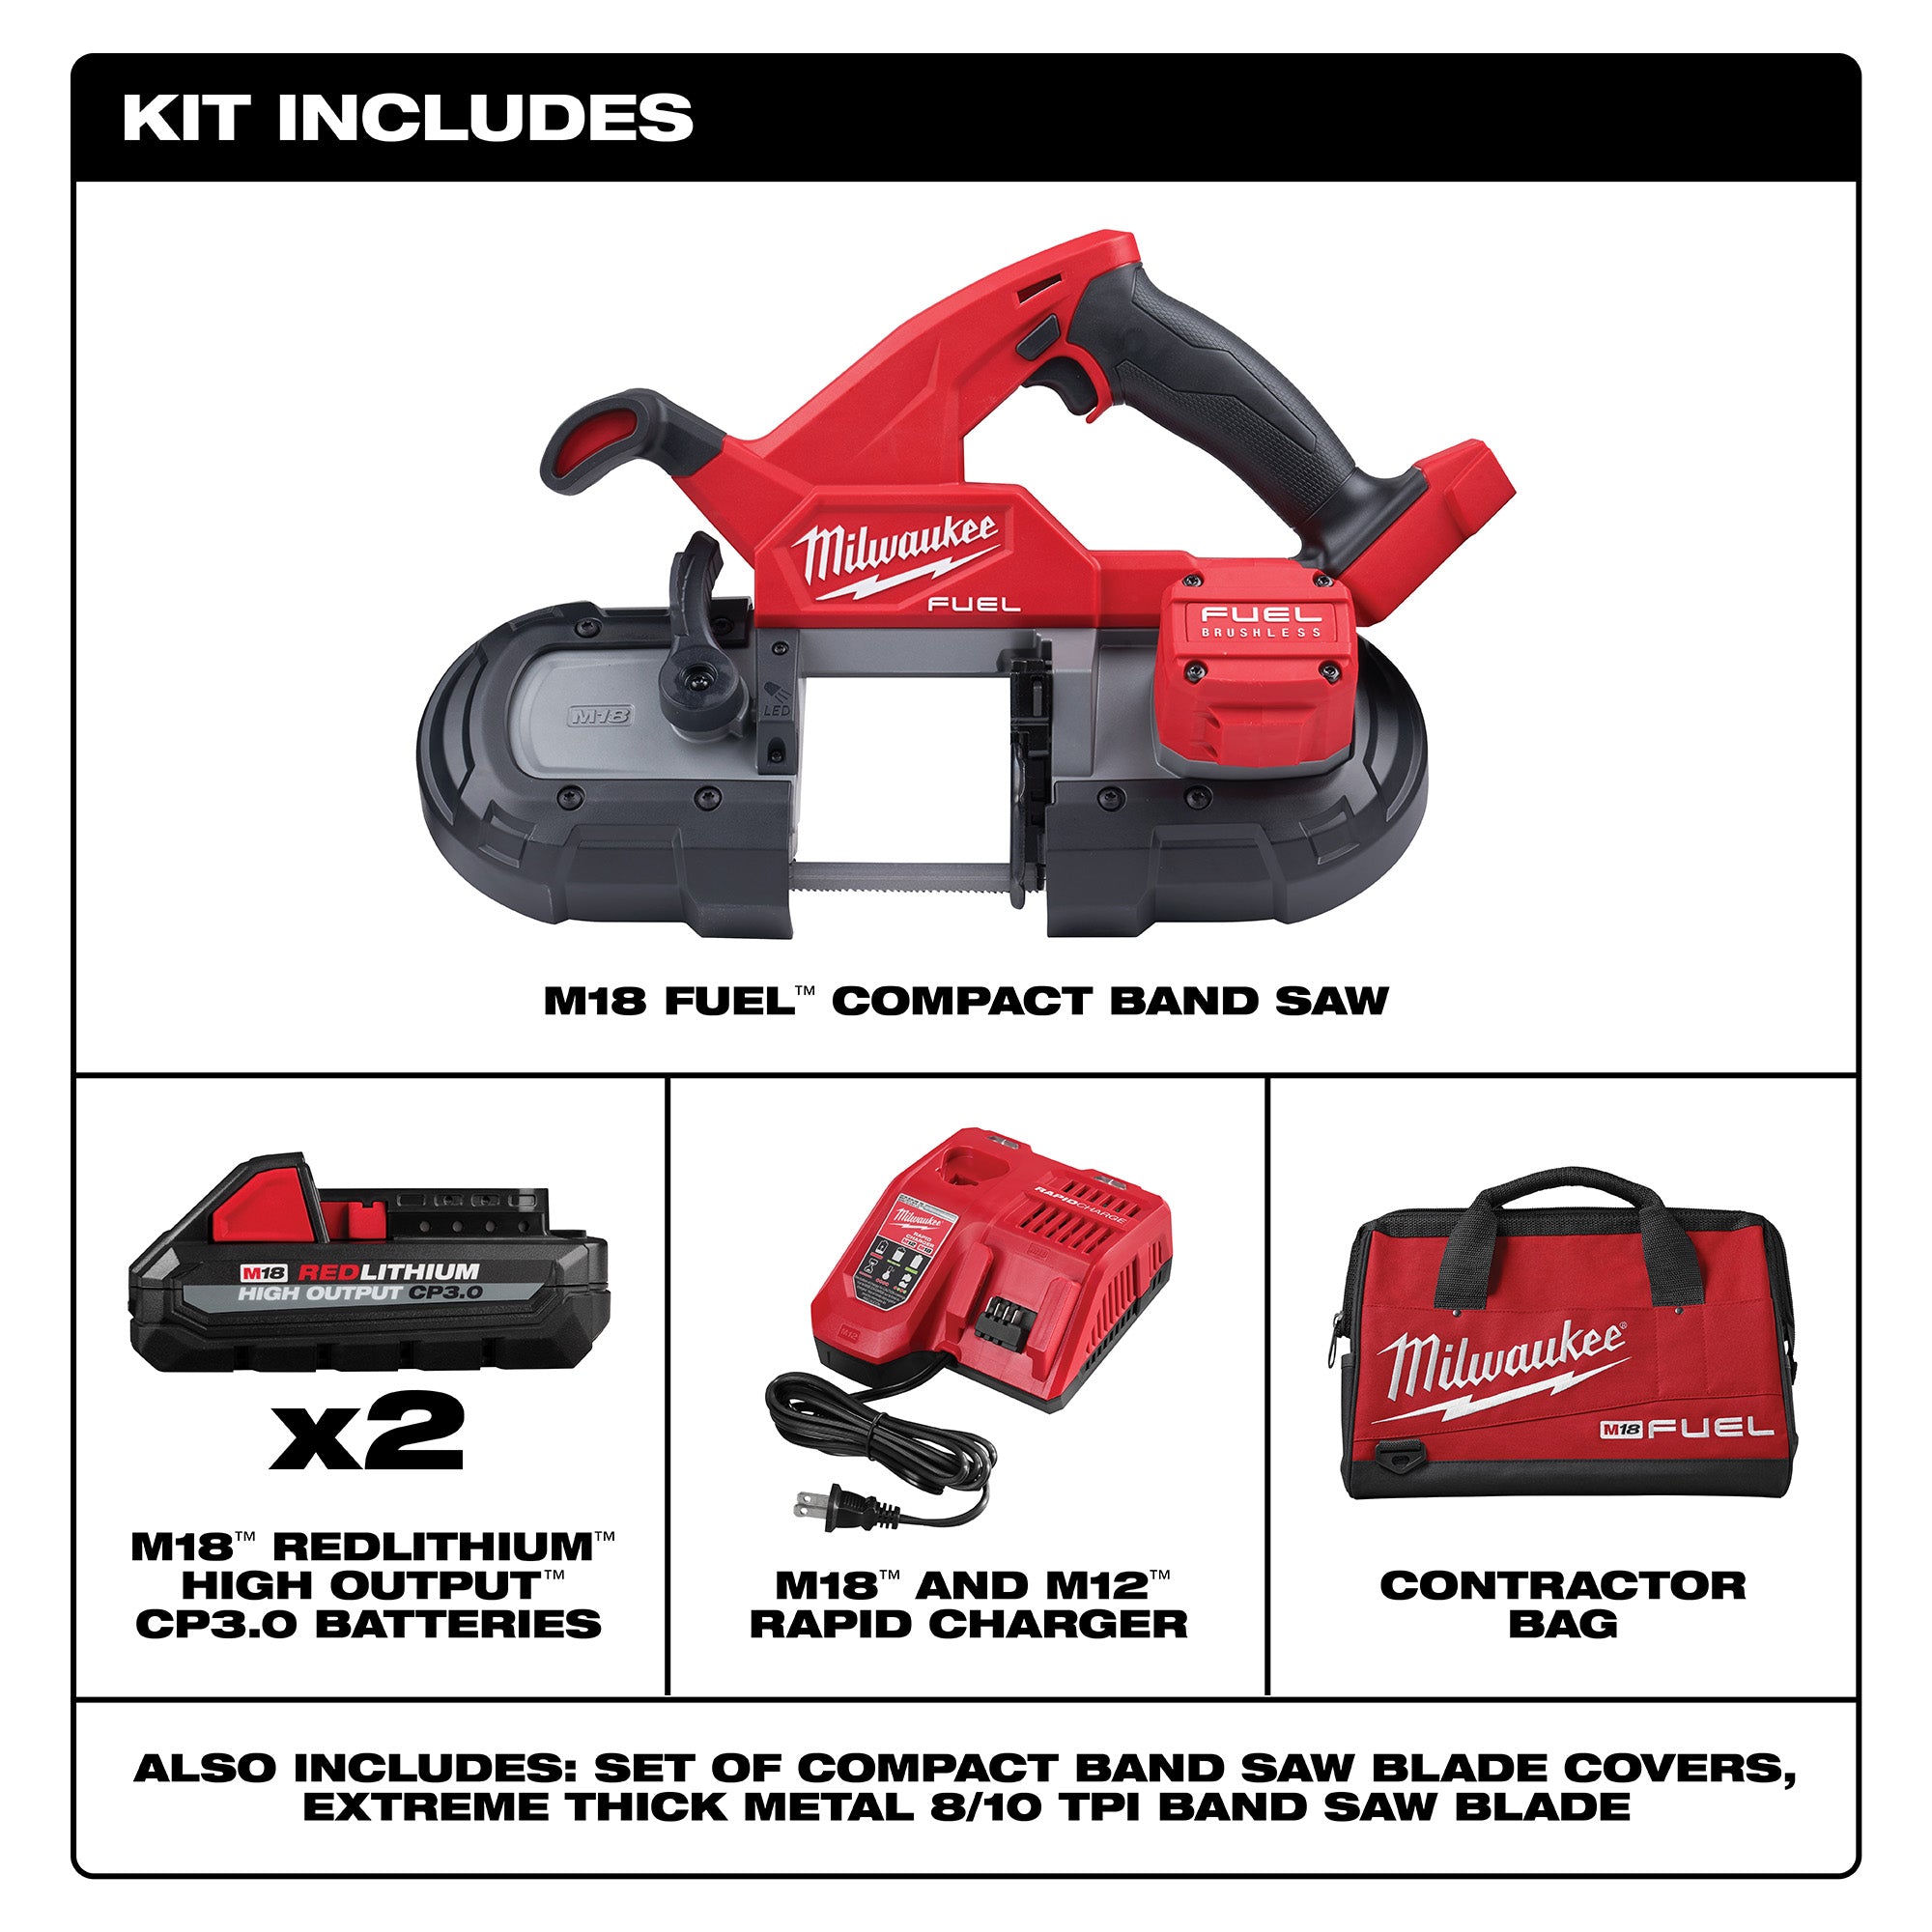 18V M18 FUEL Lithium-Ion Brushless Cordless Compact Band Saw Kit w/ Two Batteries 3.0 Ah